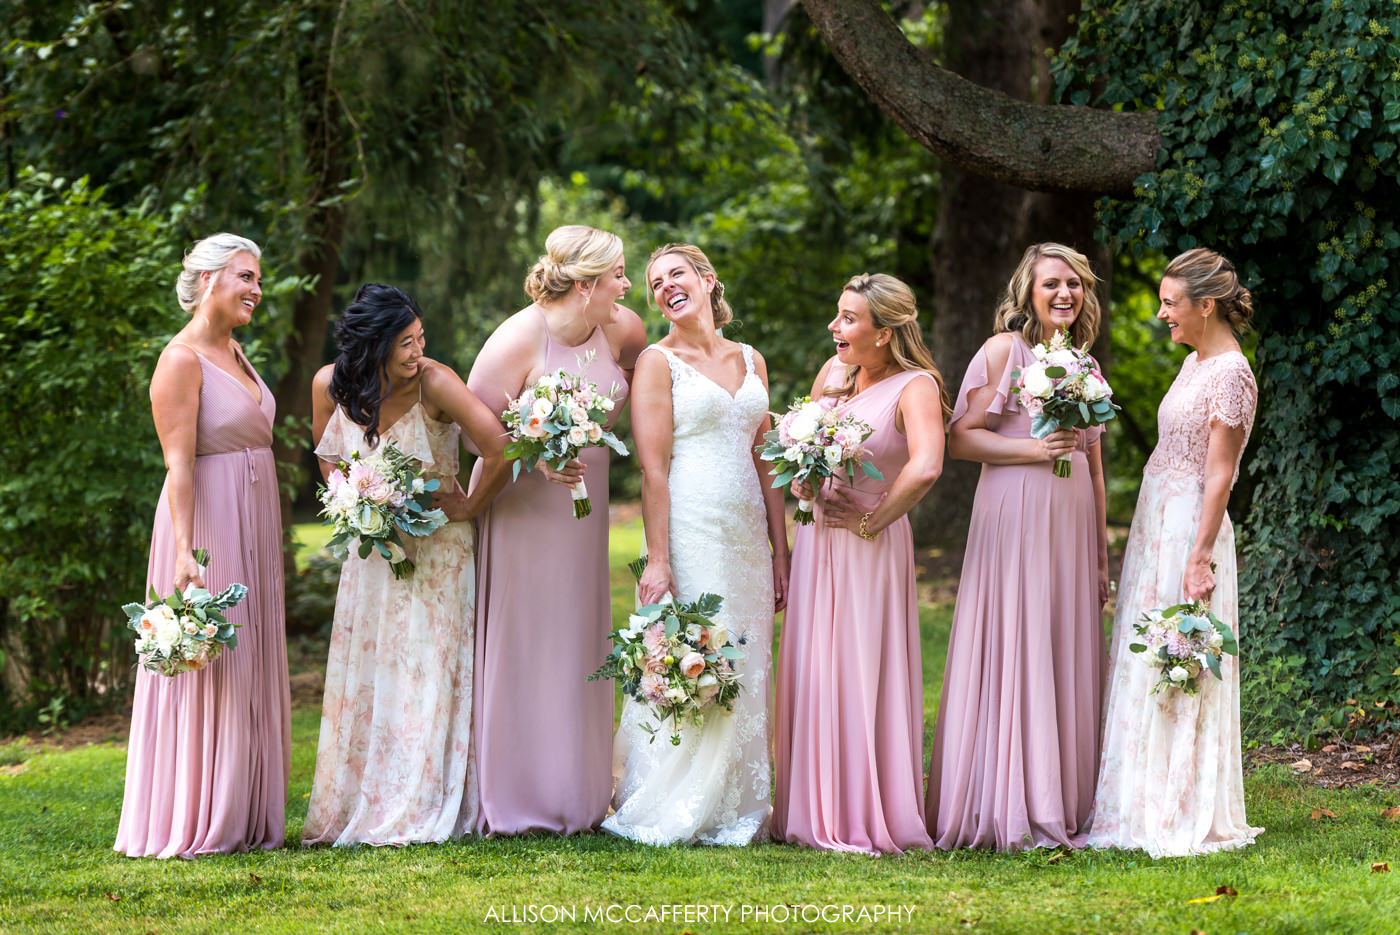 Bridesmaids dressed in pink and floral dresses at Rose Bank Winery